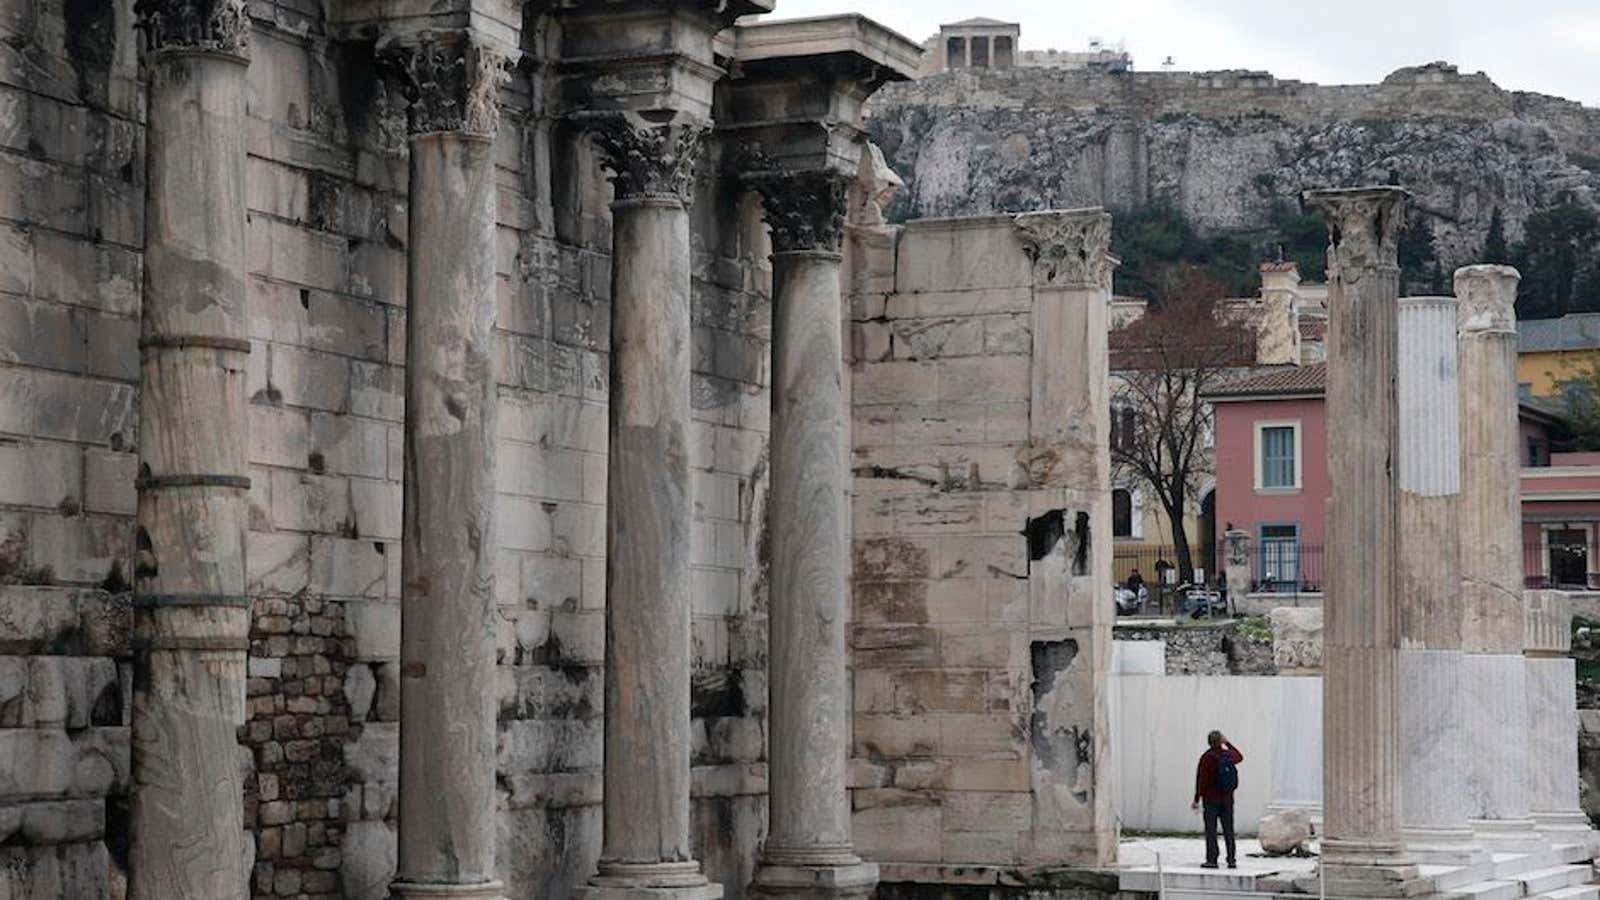 Greece makes a marked comeback, at least as a tourist destination.